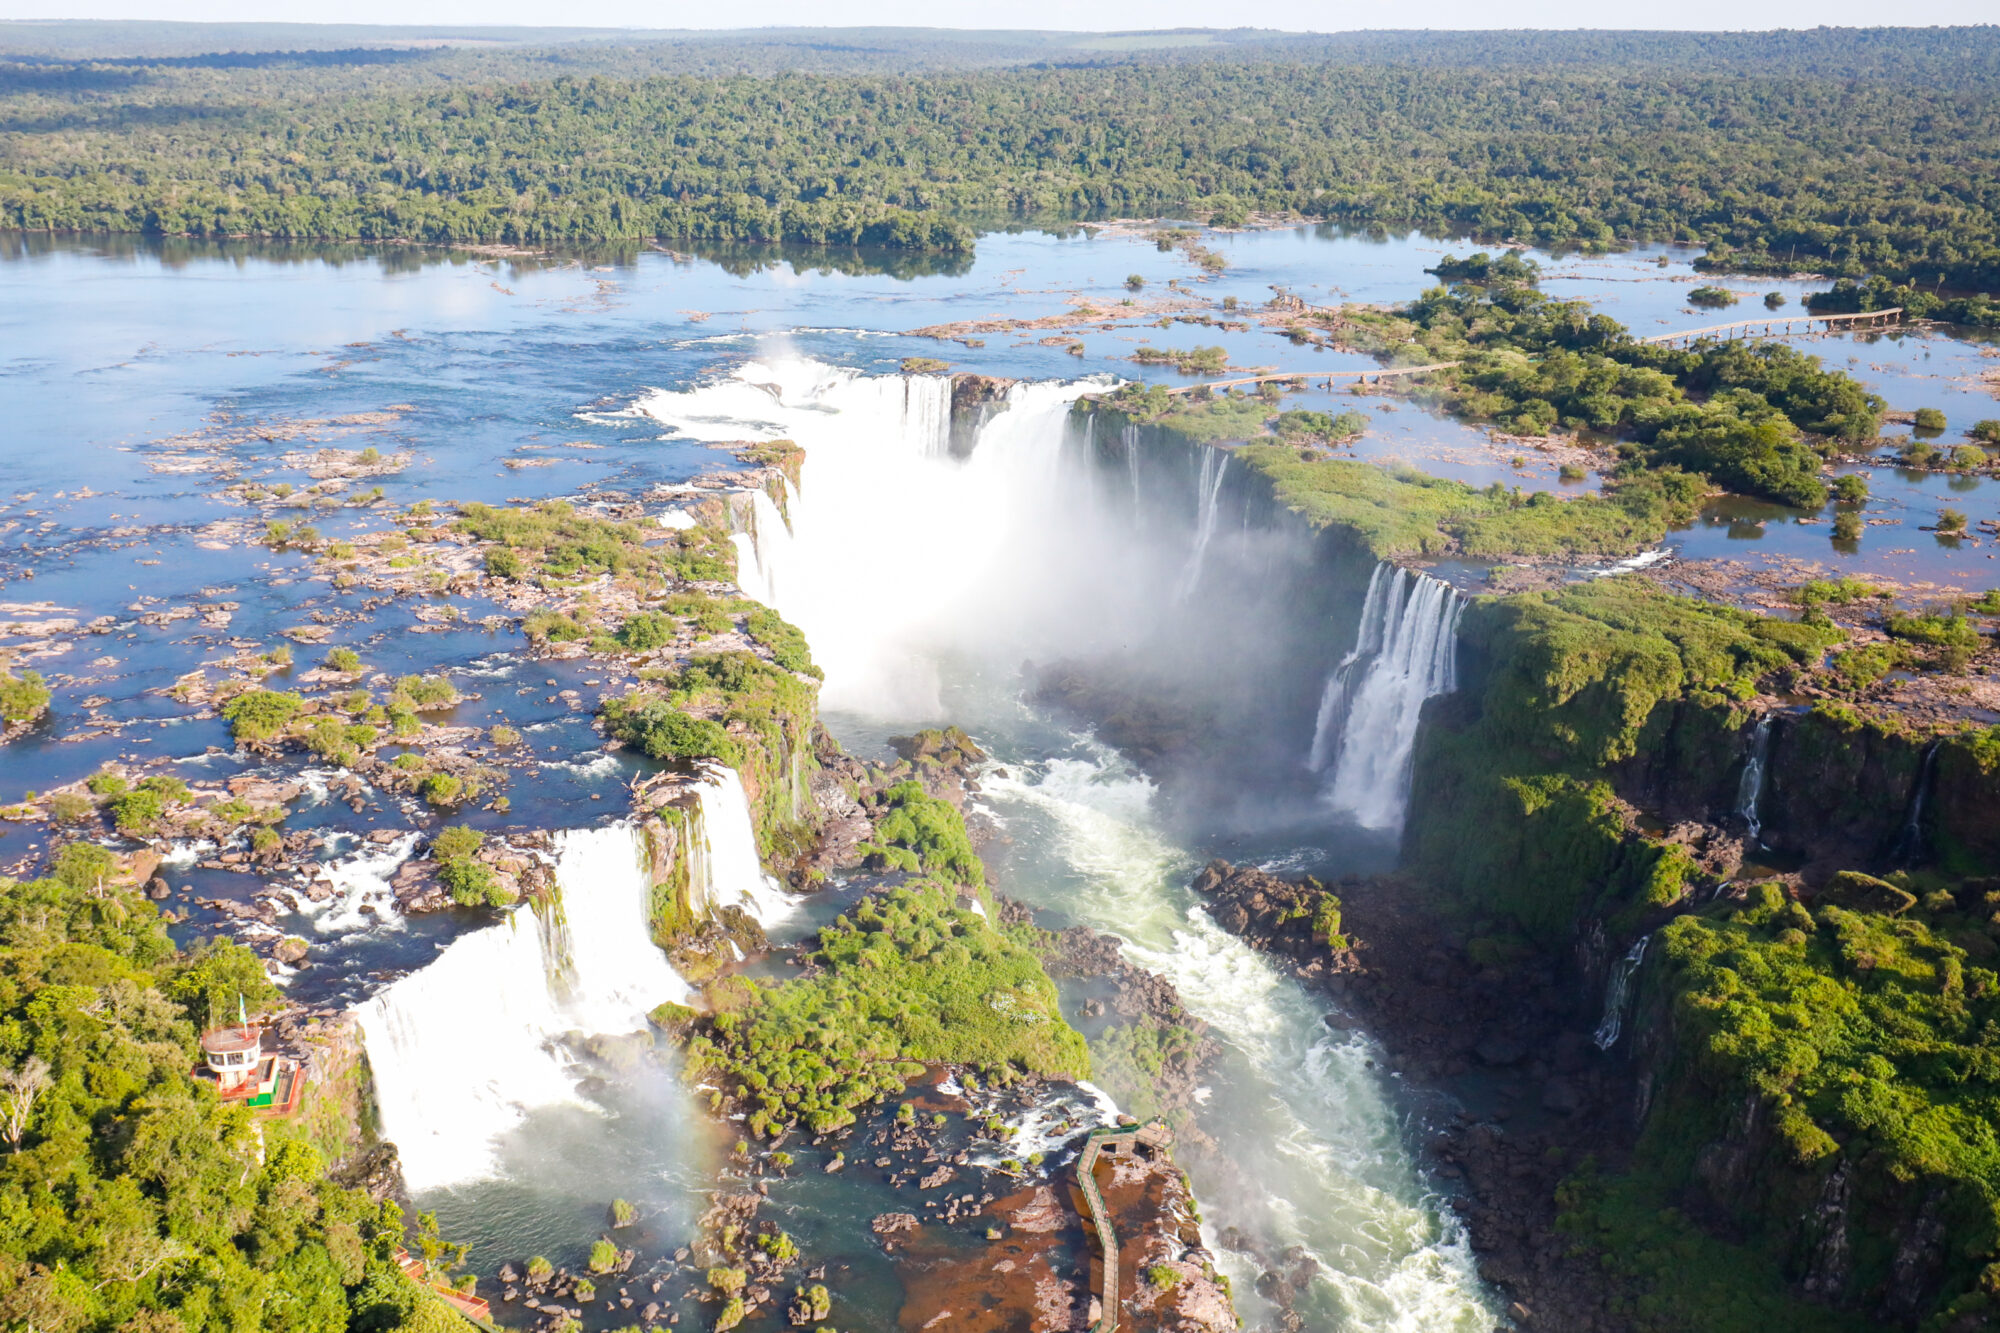 Aerial view of Iguazu Falls, at the border of Brazil and Argentina